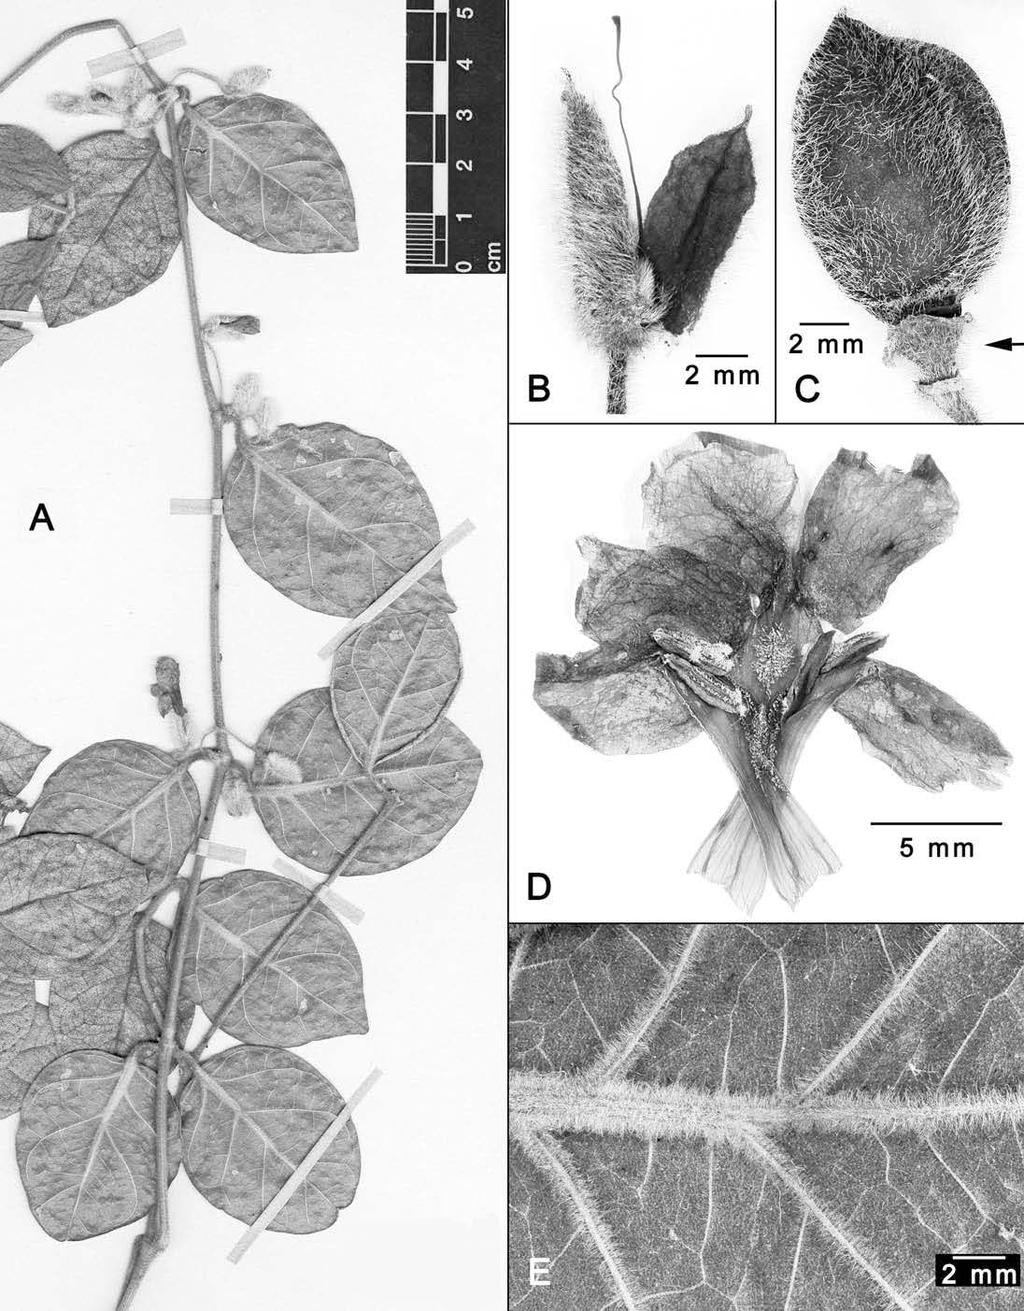 194 Novon Figure 4. Mendoncia kely E. Magnaghi. A. Habit with flowers. B. Bracteoles after corolla has fallen, showing gynoecium. C. Drupe, with calyx indicated by arrow. D. Corolla dissected to reveal androecium.